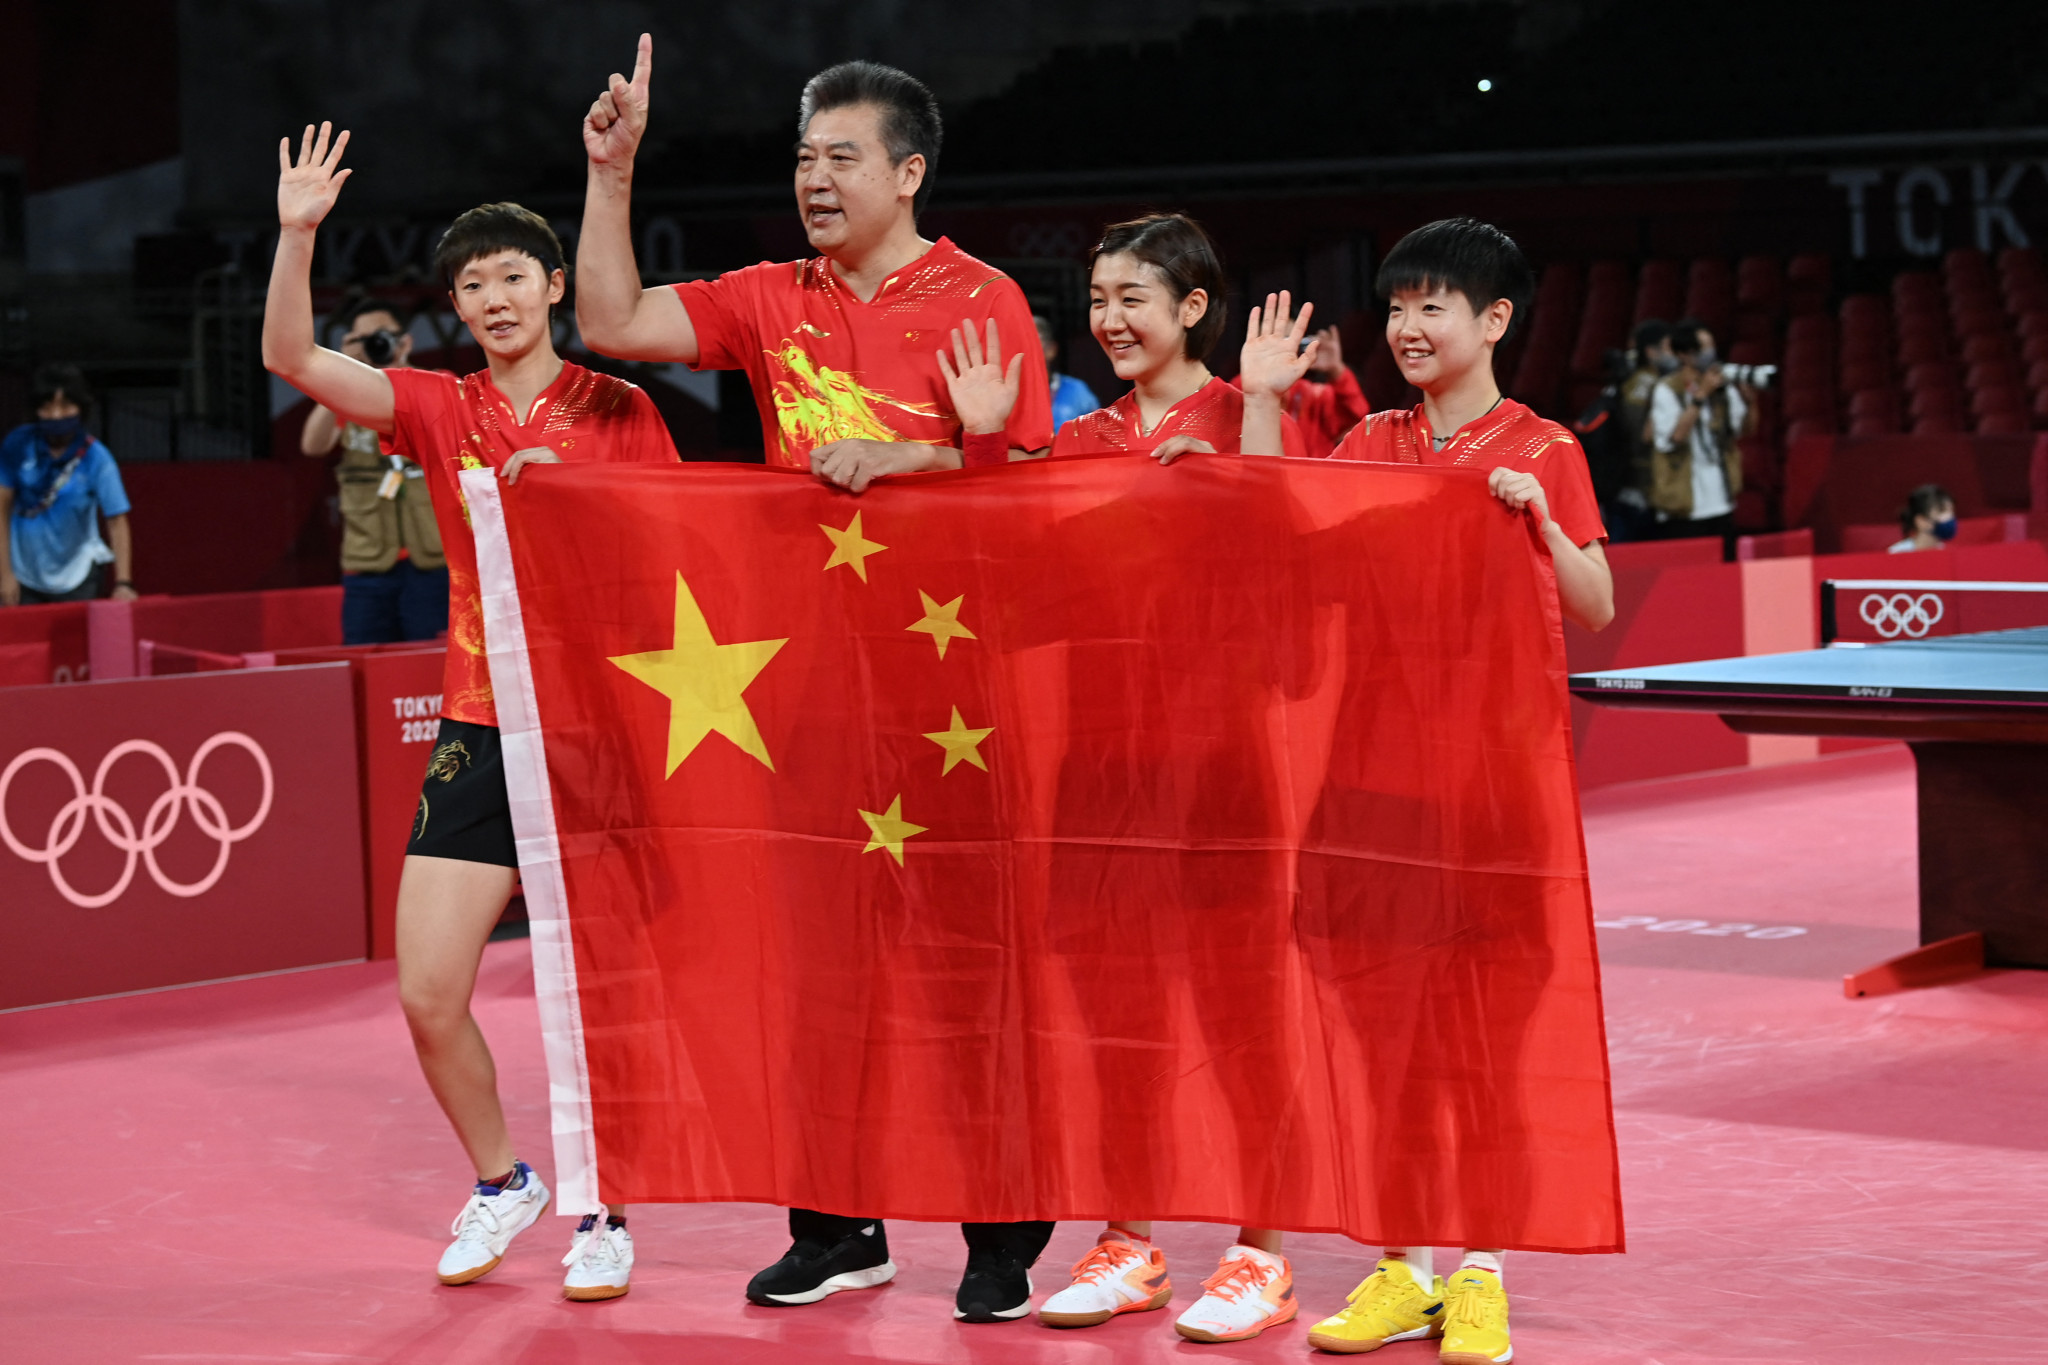 China sweep aside Japan to win gold and remain perfect in Olympic women's table tennis team event